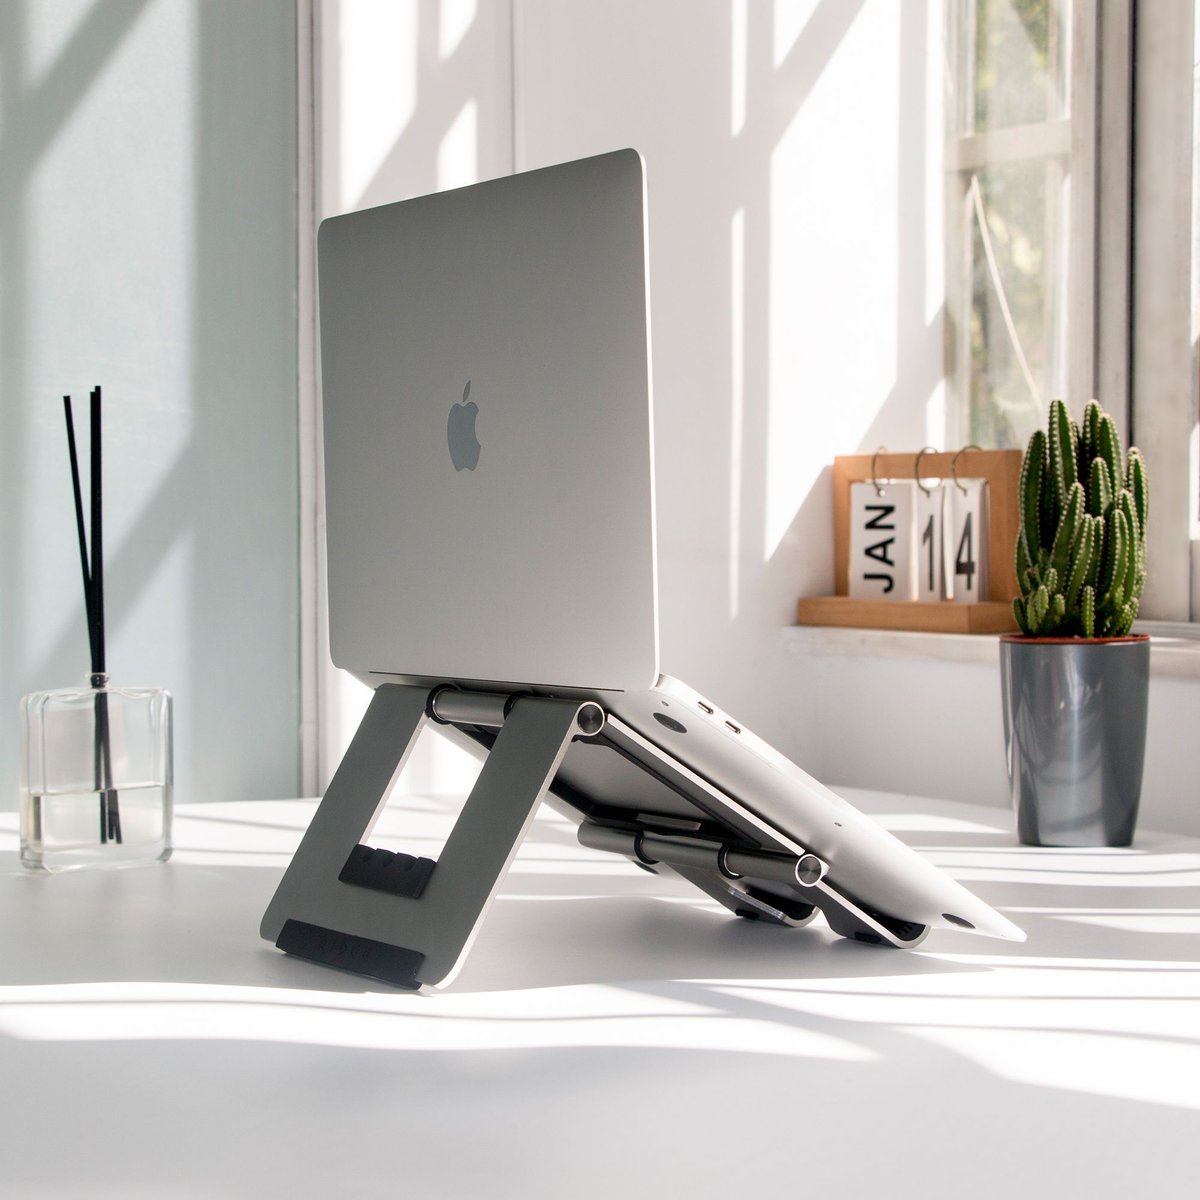 Our stand is compatible with a wide range of laptops, tablets, and smartphones. It's also fully adjustable to fit your needs. 

#laptopaccessories #creativelife #workhardanywhere #laptopstand #design #homeoffice #desksetup #WorkspaceCollection #Workspace #programming #coding